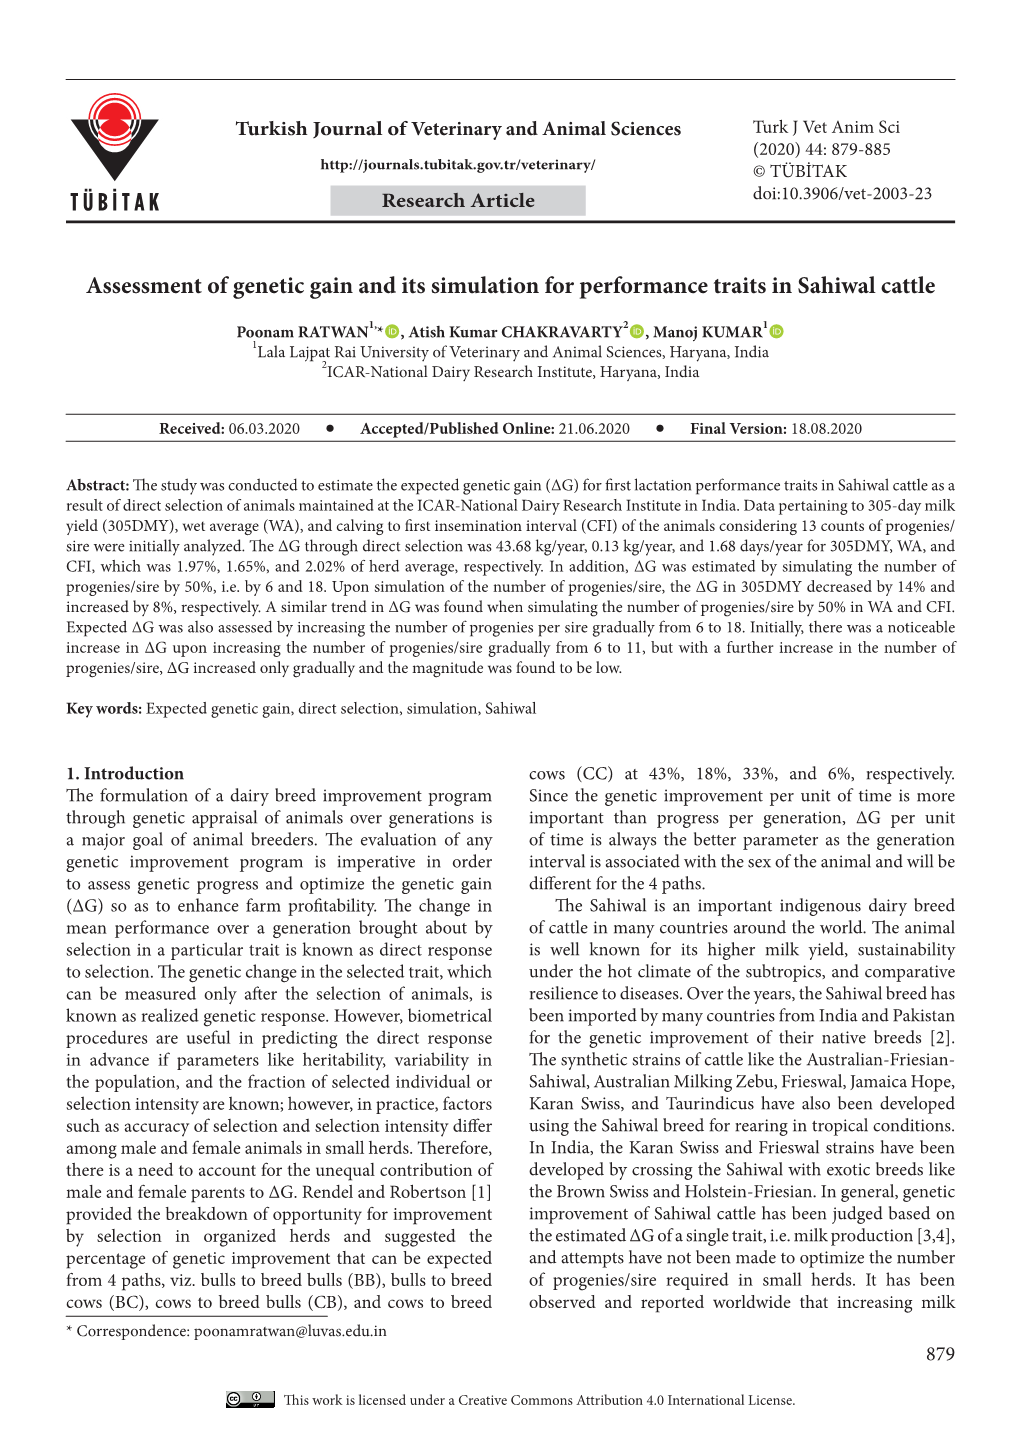 Assessment of Genetic Gain and Its Simulation for Performance Traits in Sahiwal Cattle